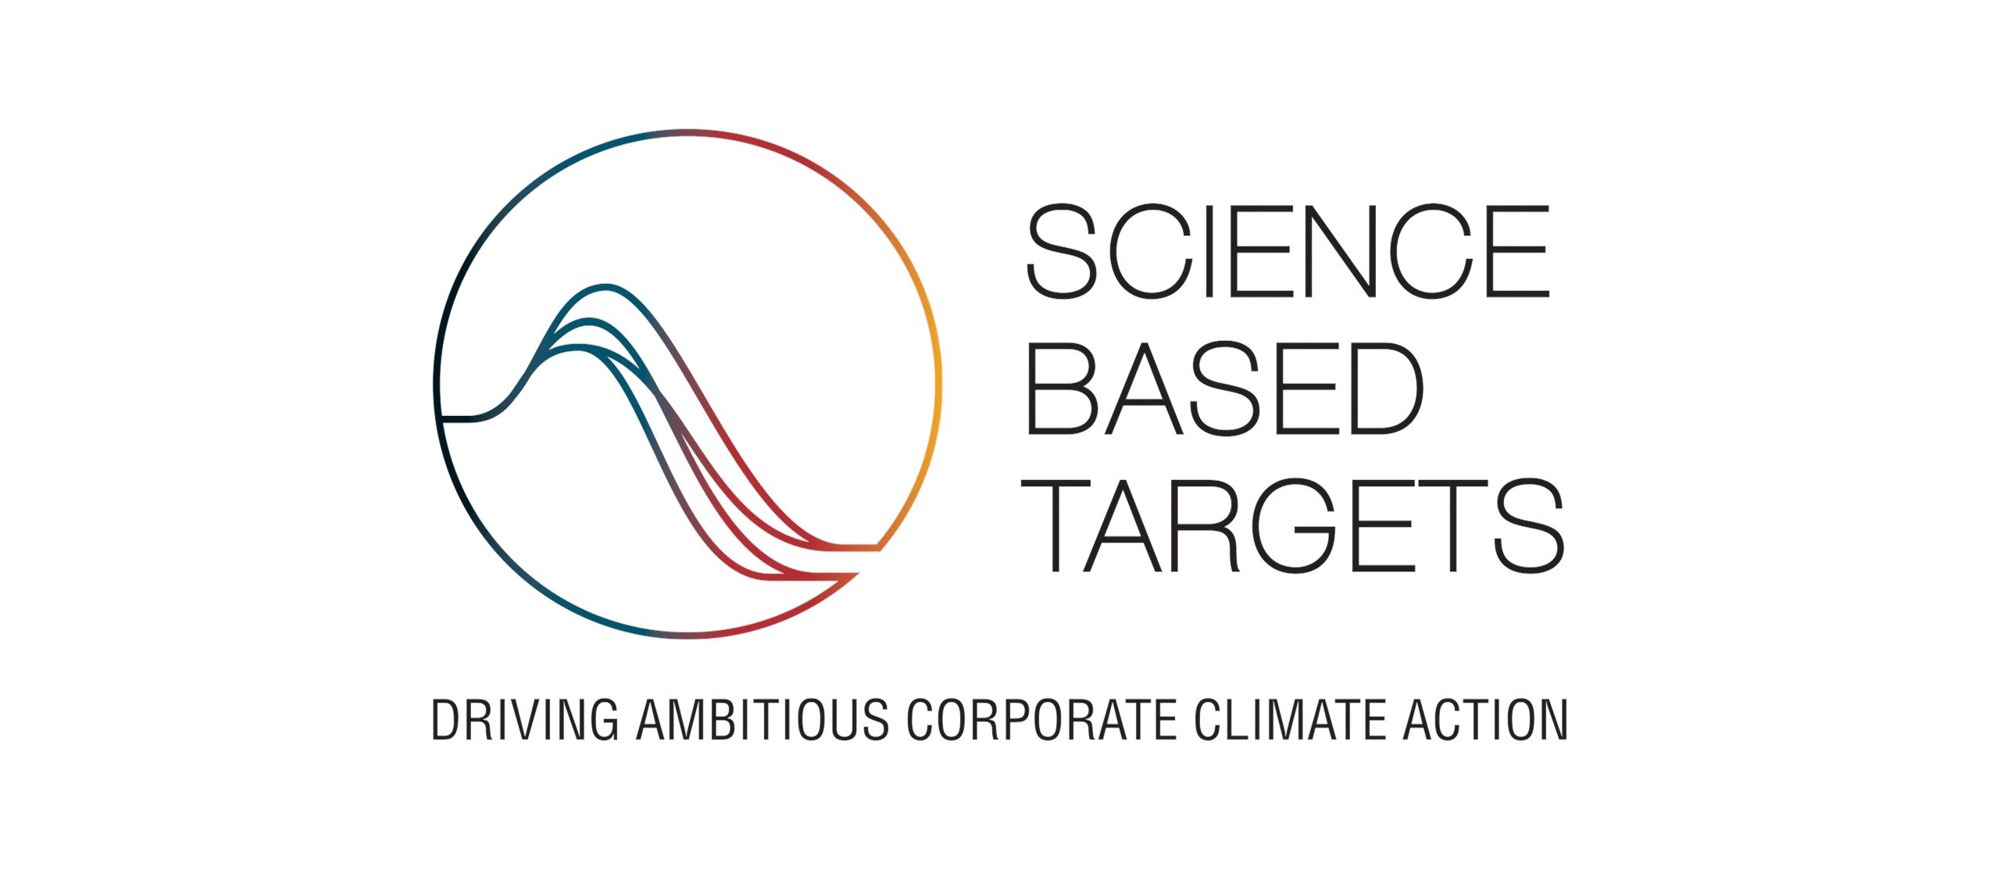 Arcadyan’s Carbon Reduction and Net-zero Target Approved by SBTi